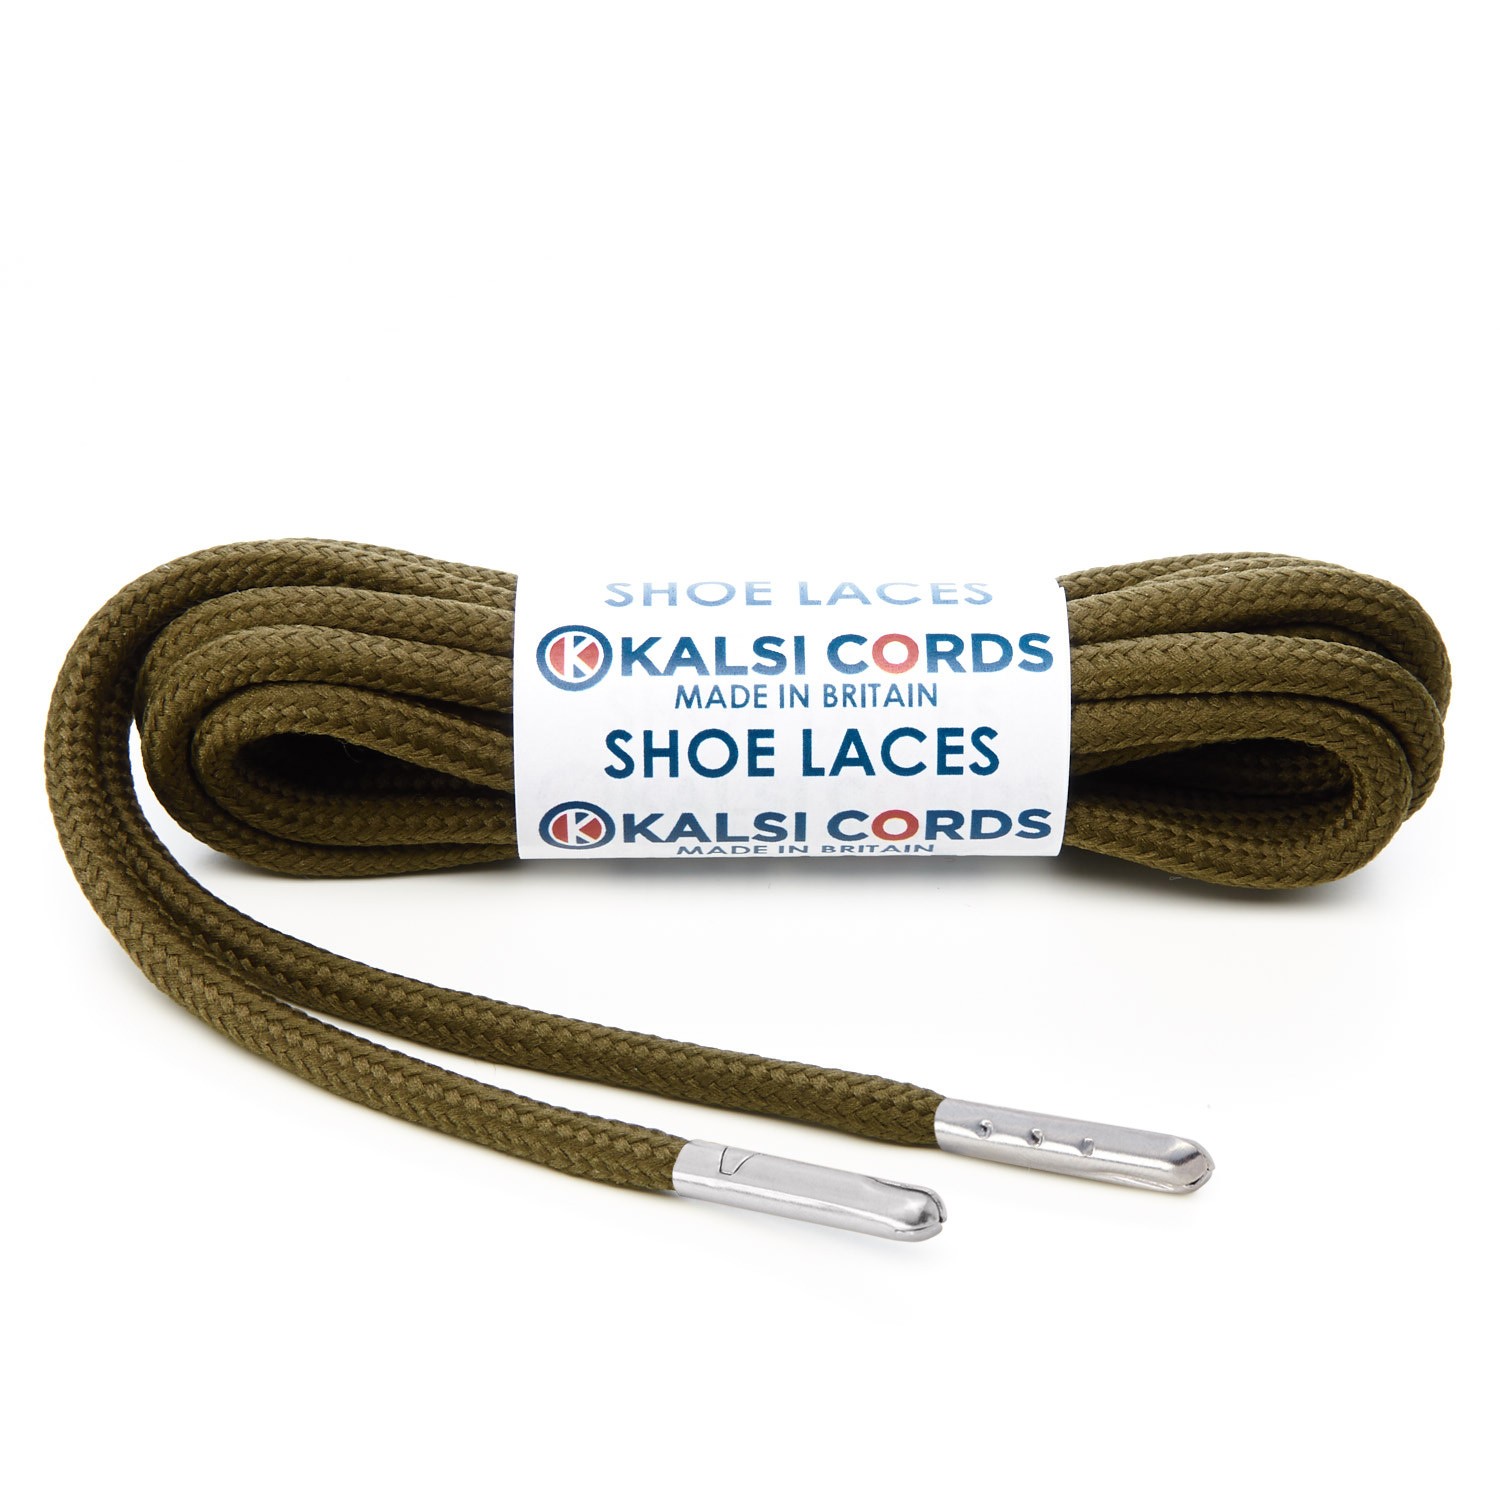 T621 5mm Round Polyester Shoe Laces Everglade 1 Silver Metal Tip Kalsi Cords